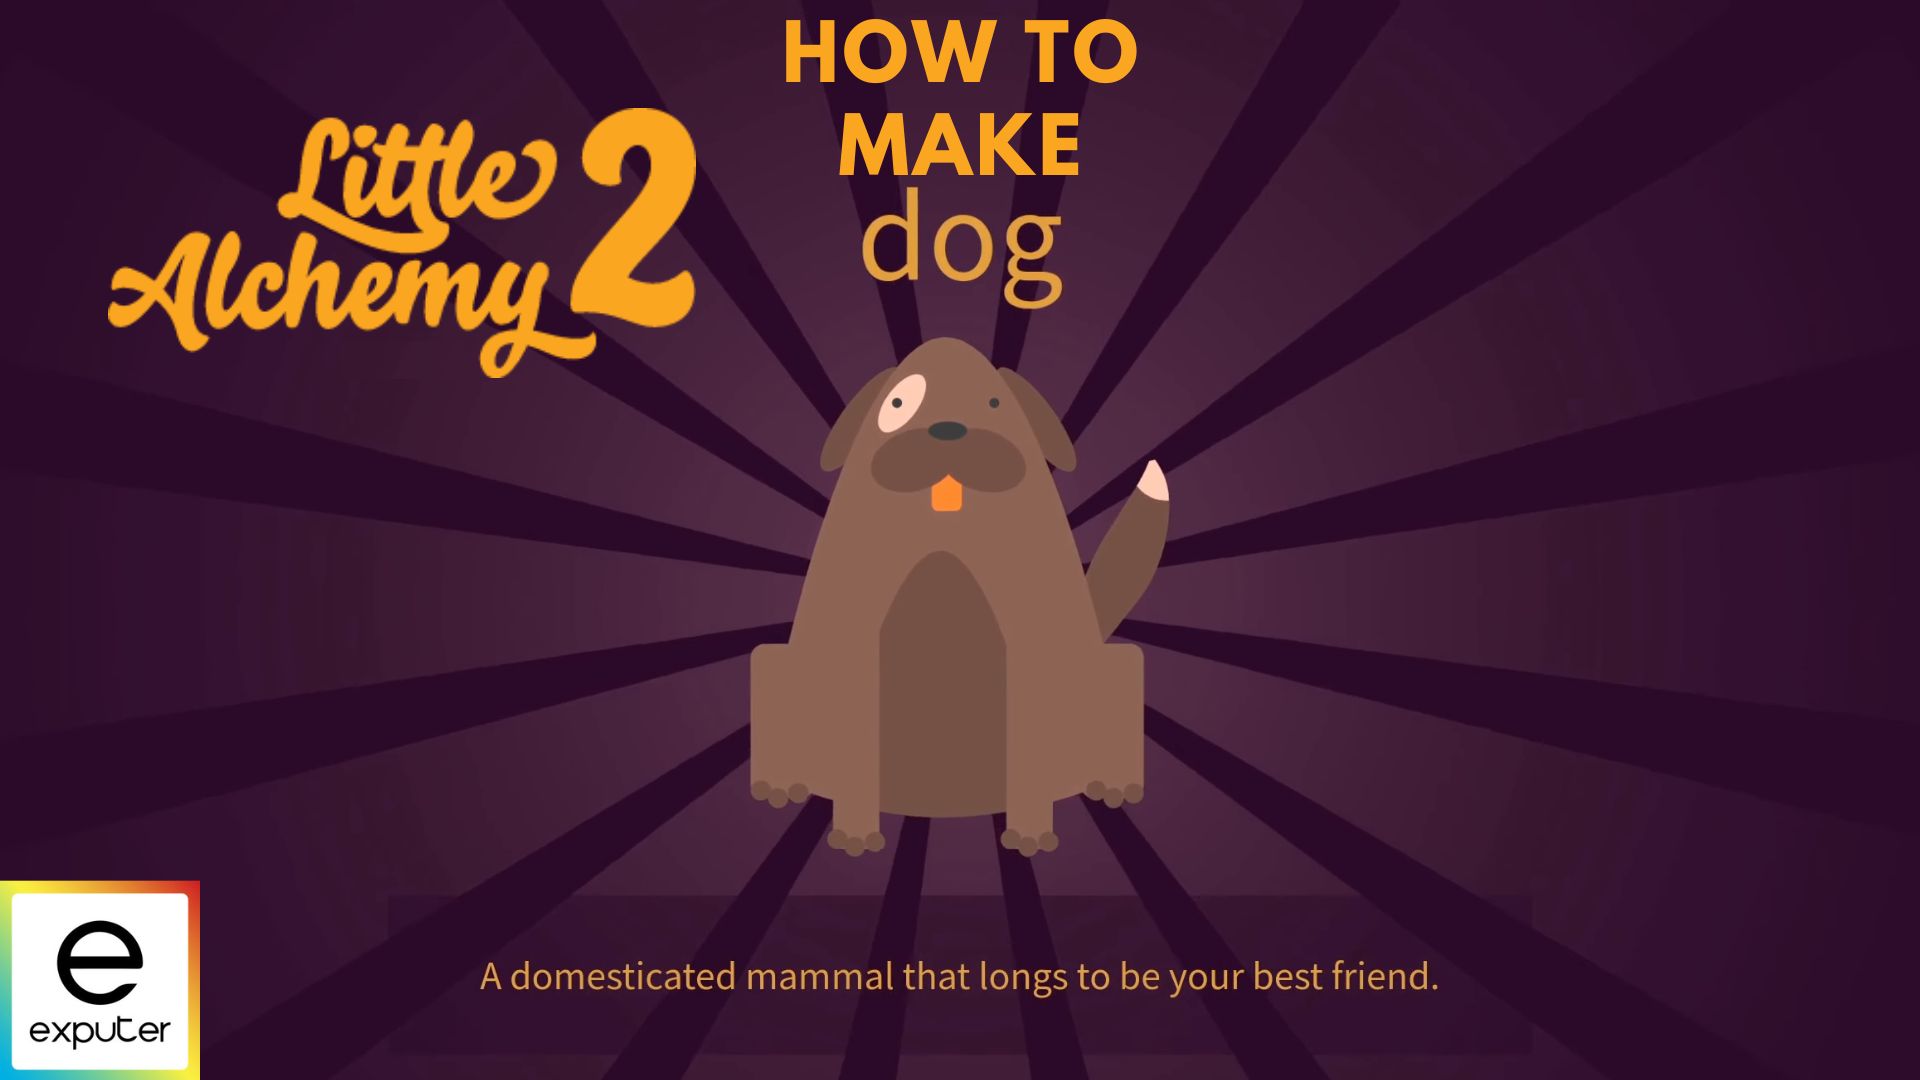 Little Alchemy 2: How To Make Dog [Explained] 